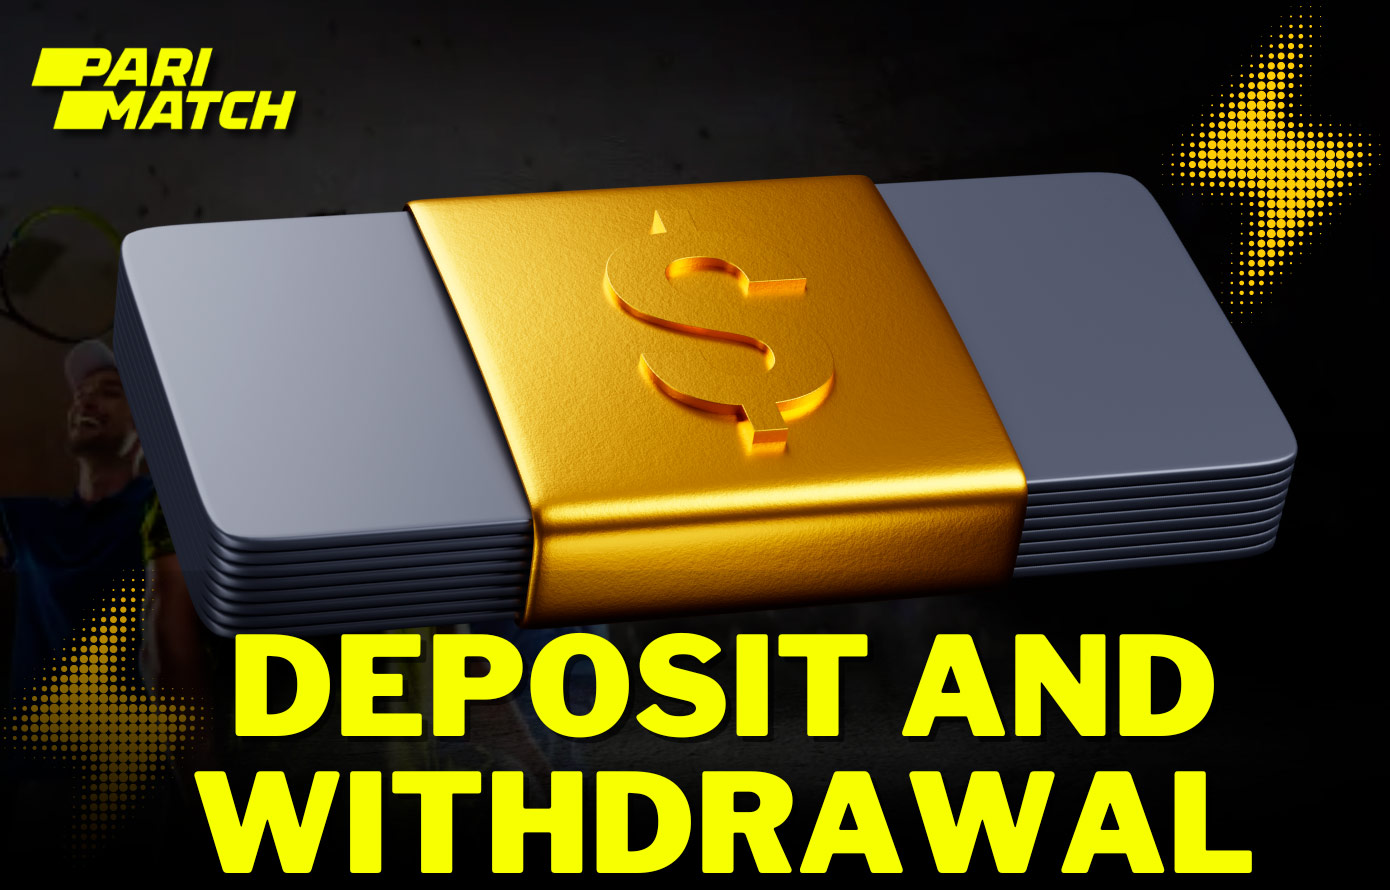 Deposit and withdraw funds on the Parimatch website